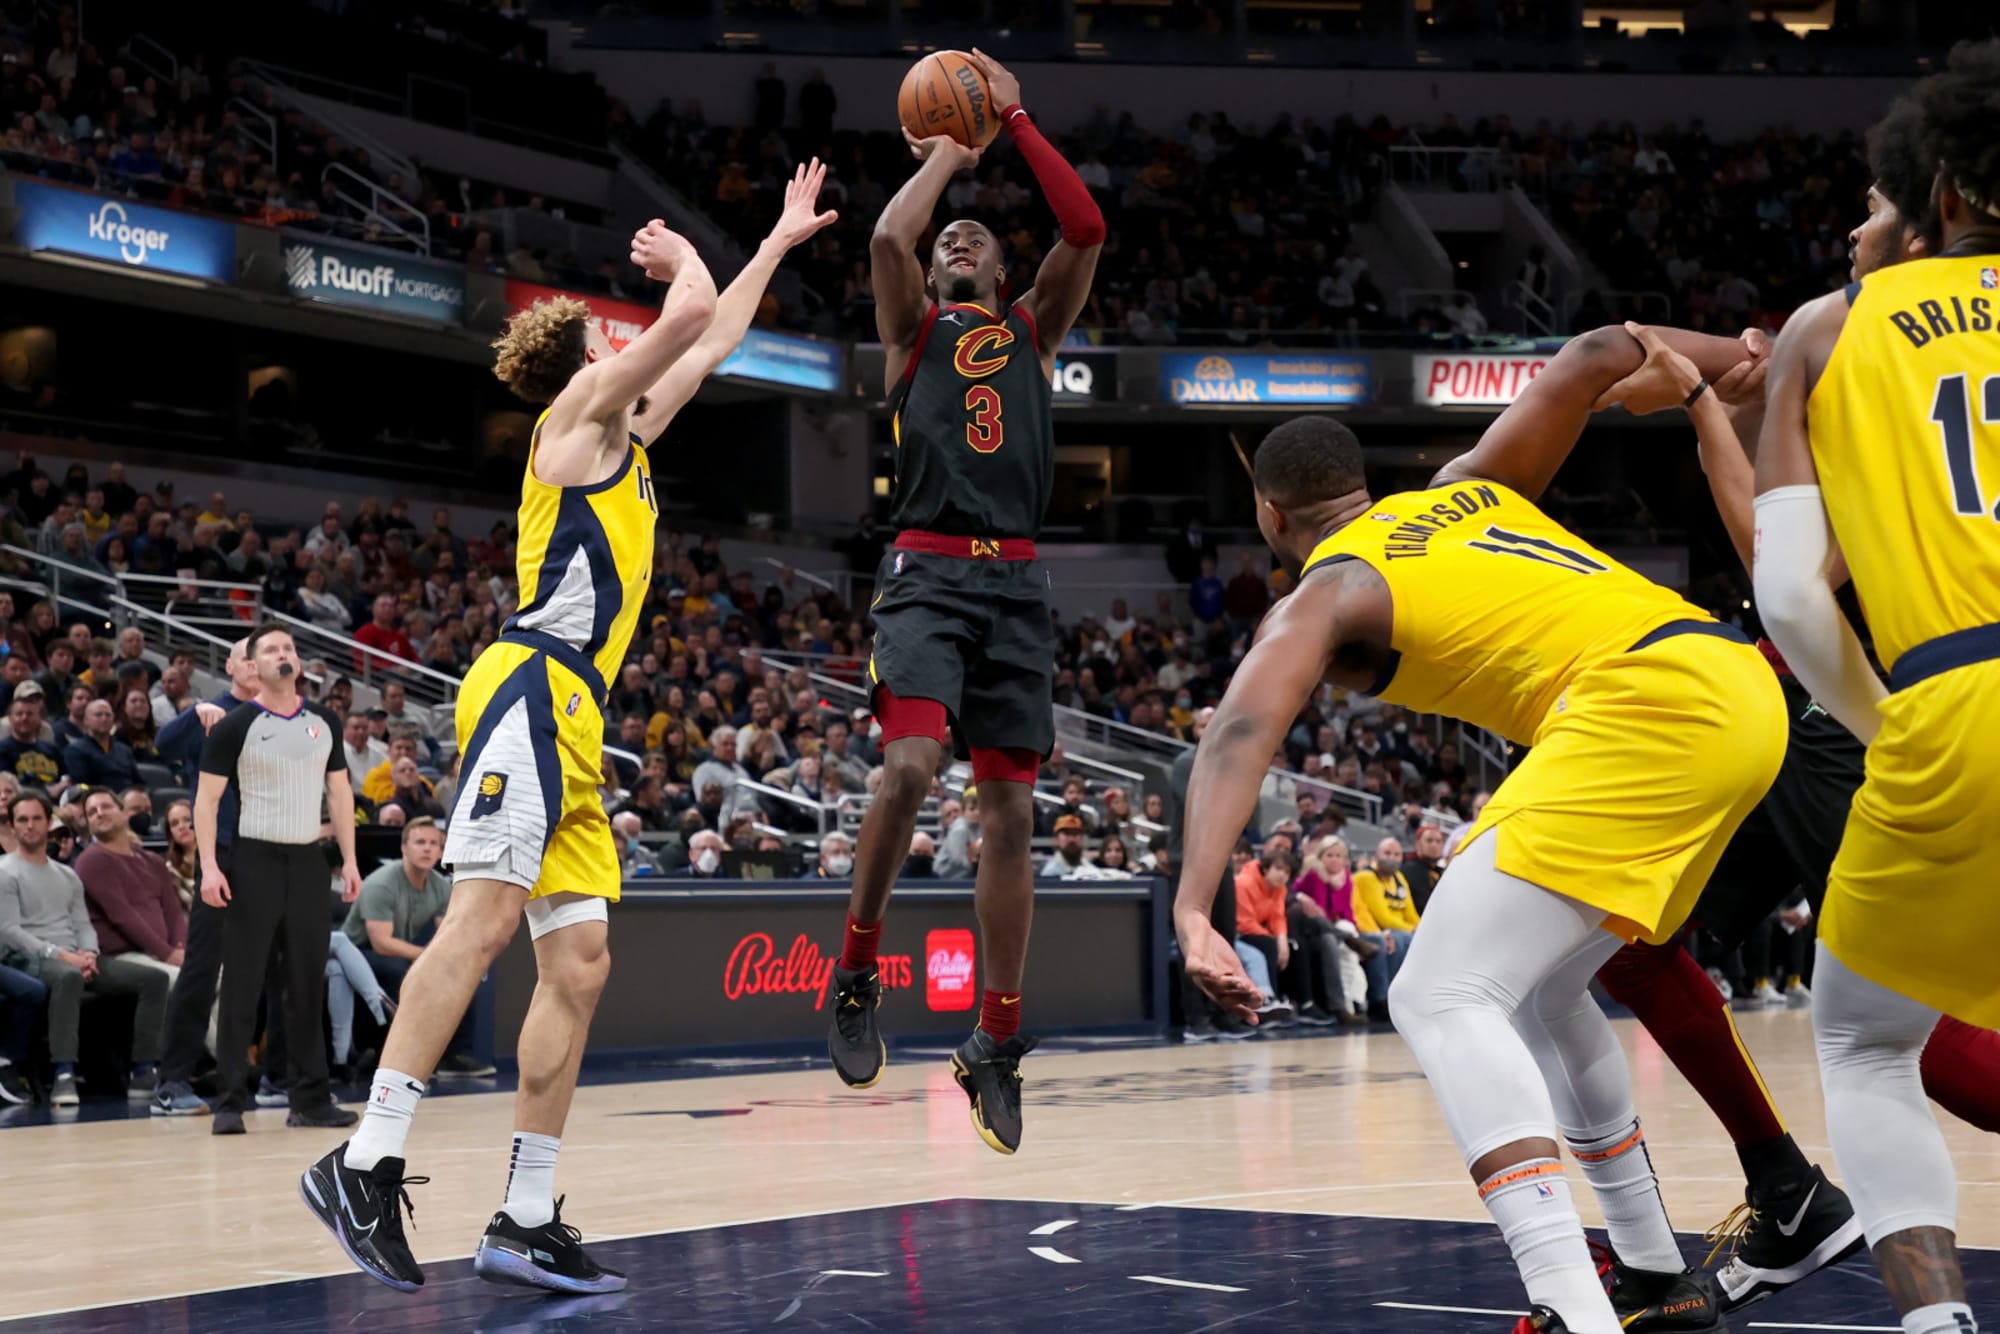 Cavs pull off another stunner, acquire LeVert from Pacers